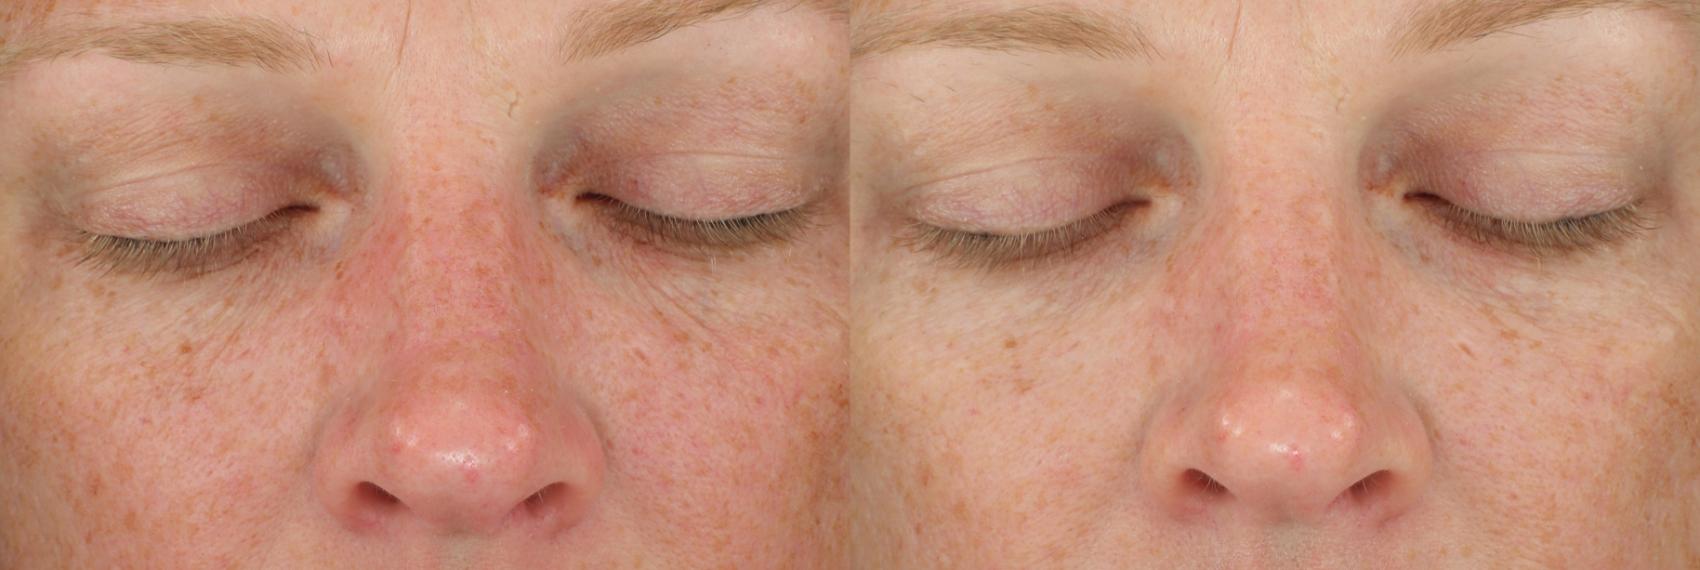 Before picture shows a woman's face with normal hyperpigmentation. After picture shows visibly brighter and glowing skin.